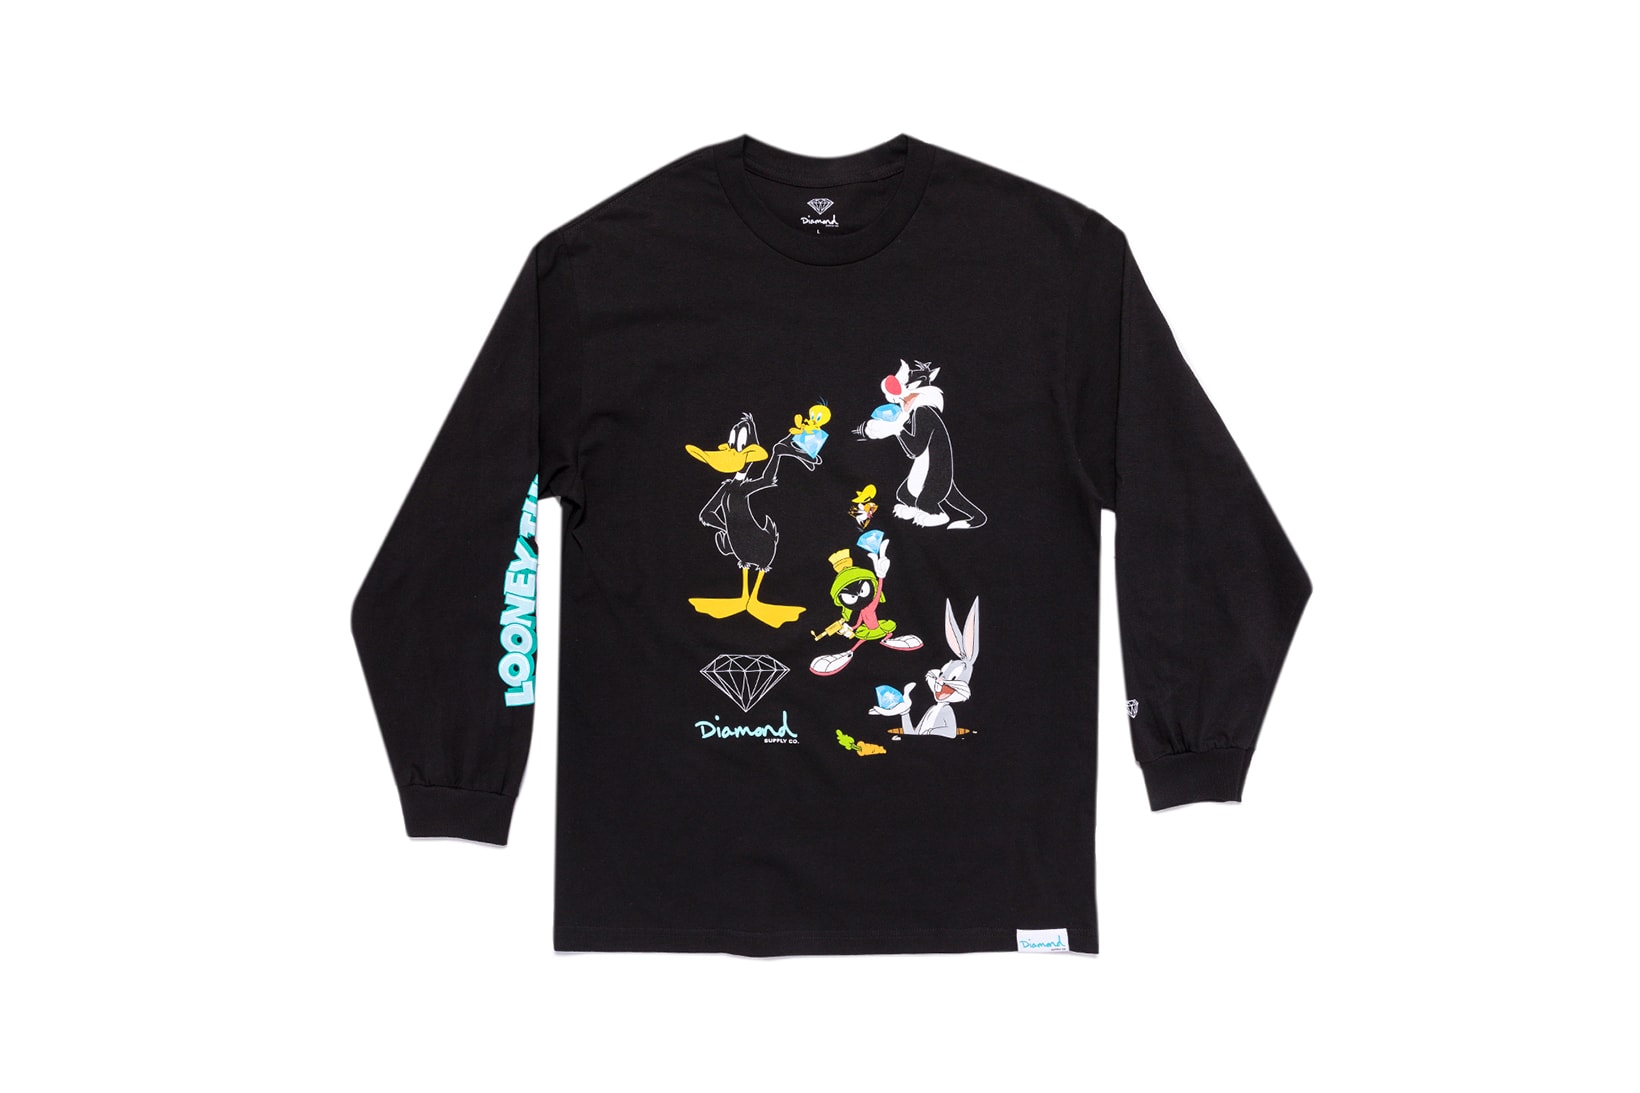 Looney Tunes x Diamond Supply Co. Collection Sylvester Bugs Bunny Daffy Duck Marvin the Martian Long Sleeve Black